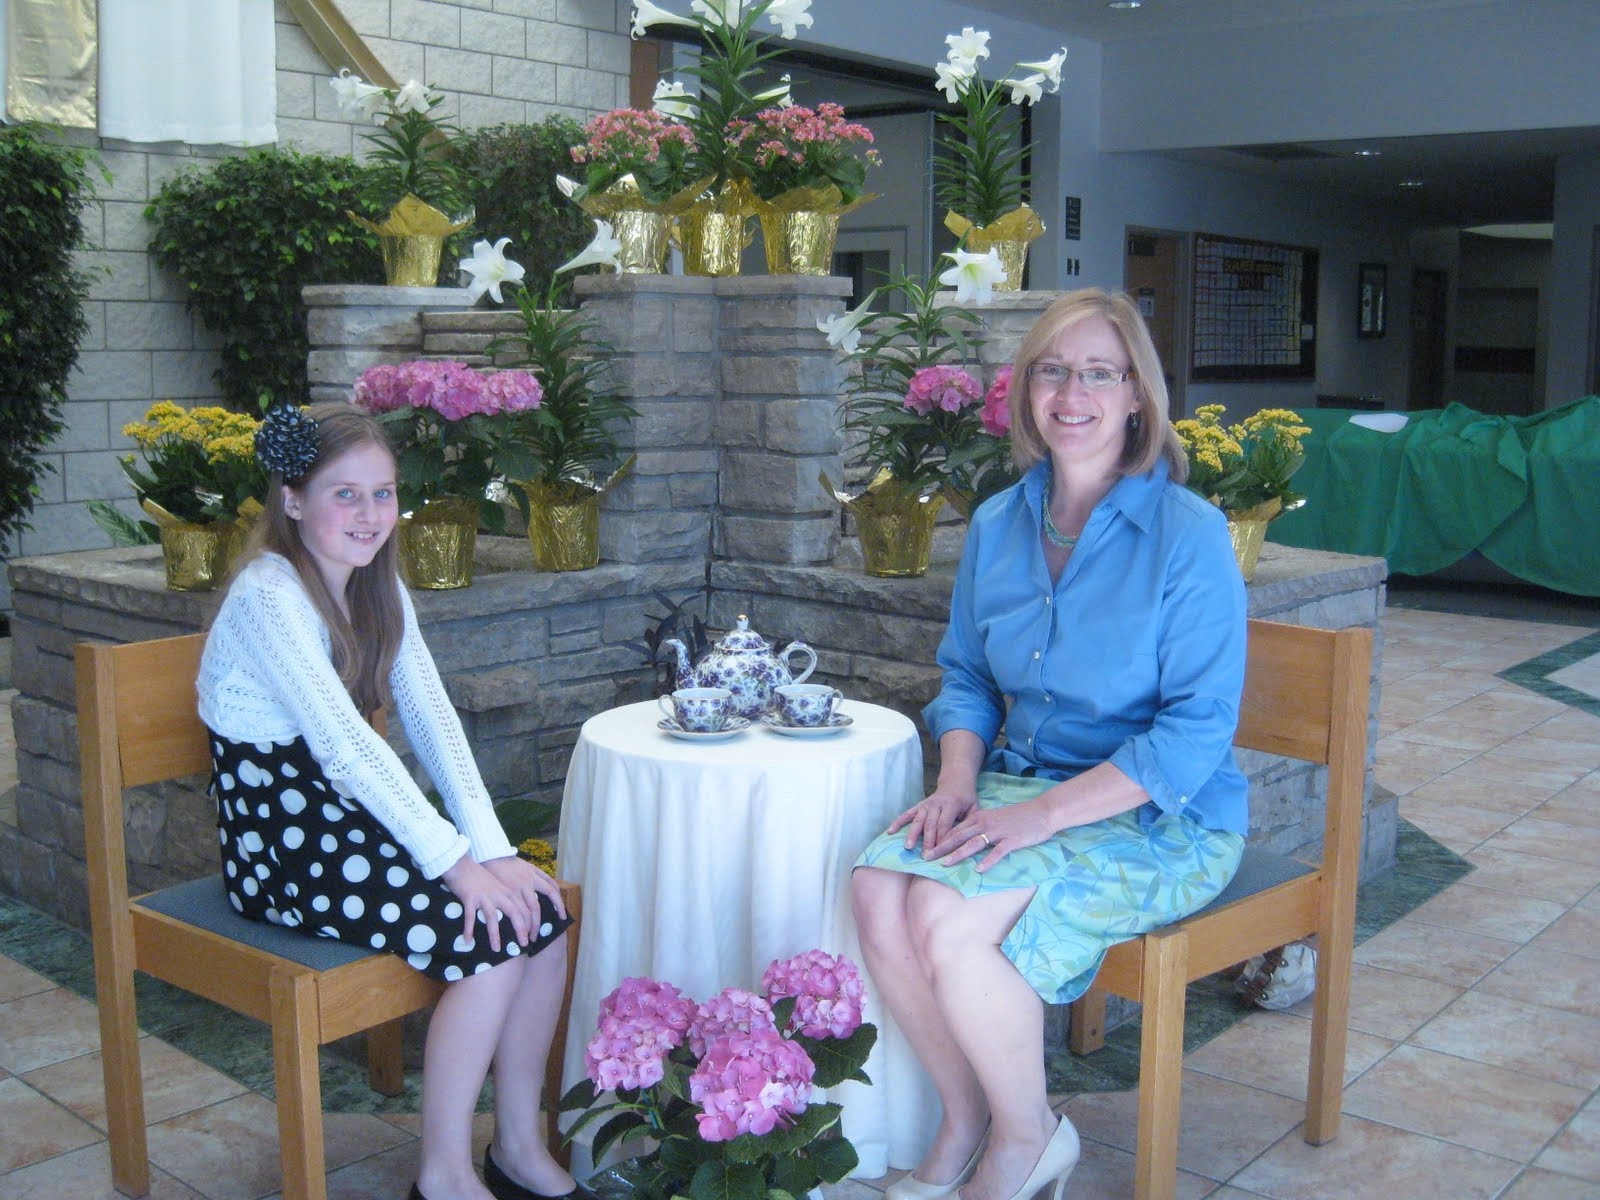 Mother Daughter Tea Party Ideas Church
 The Pious Sodality of Church La s A Mother Daughter Tea